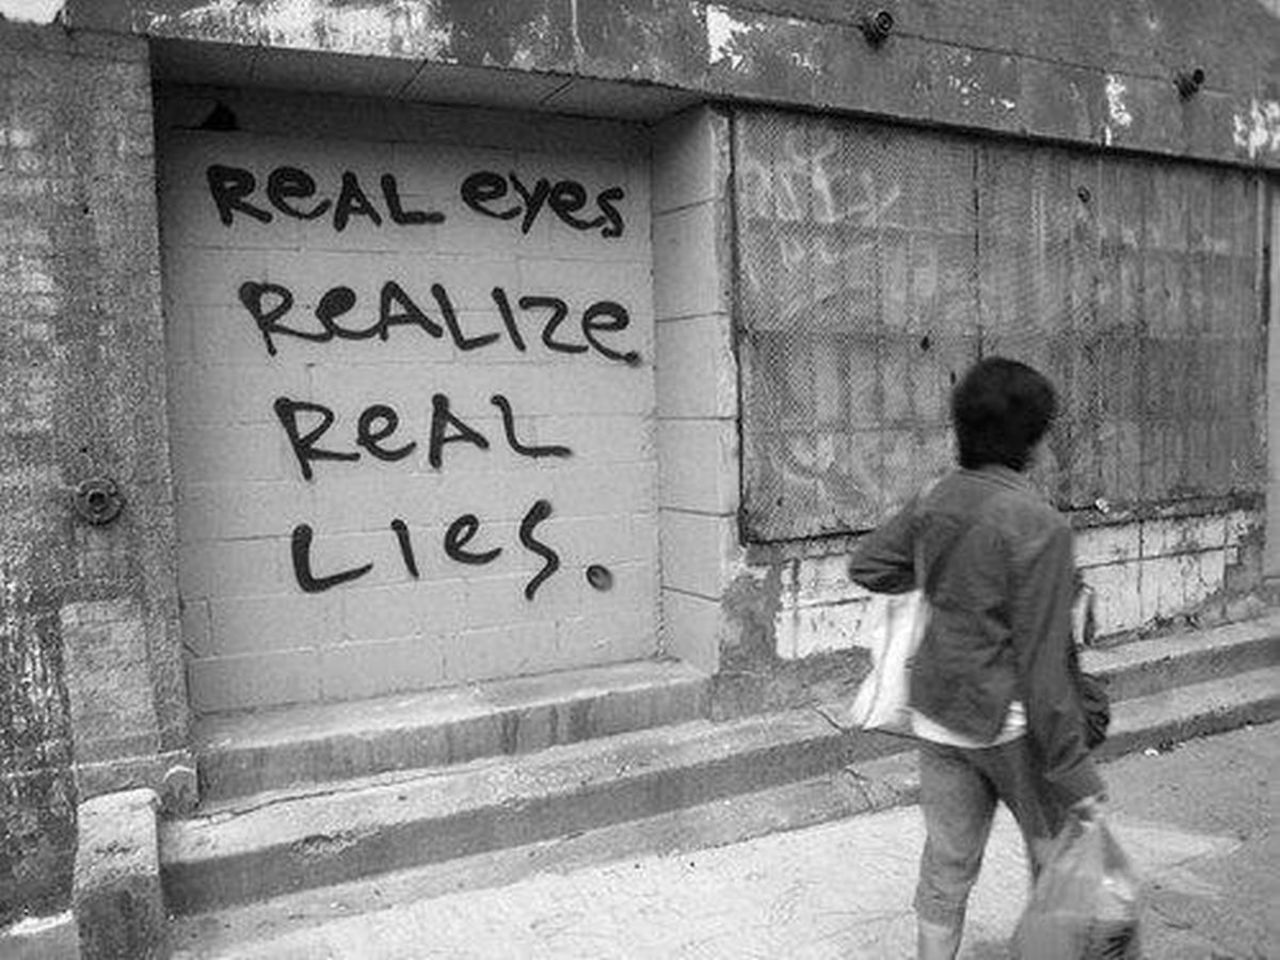 #StreetArtSaturday #MeaningOfLife Classic scribbled #Streetart ... I've seen this pithy thought written many places. https://t.co/4QtiyjDTHm